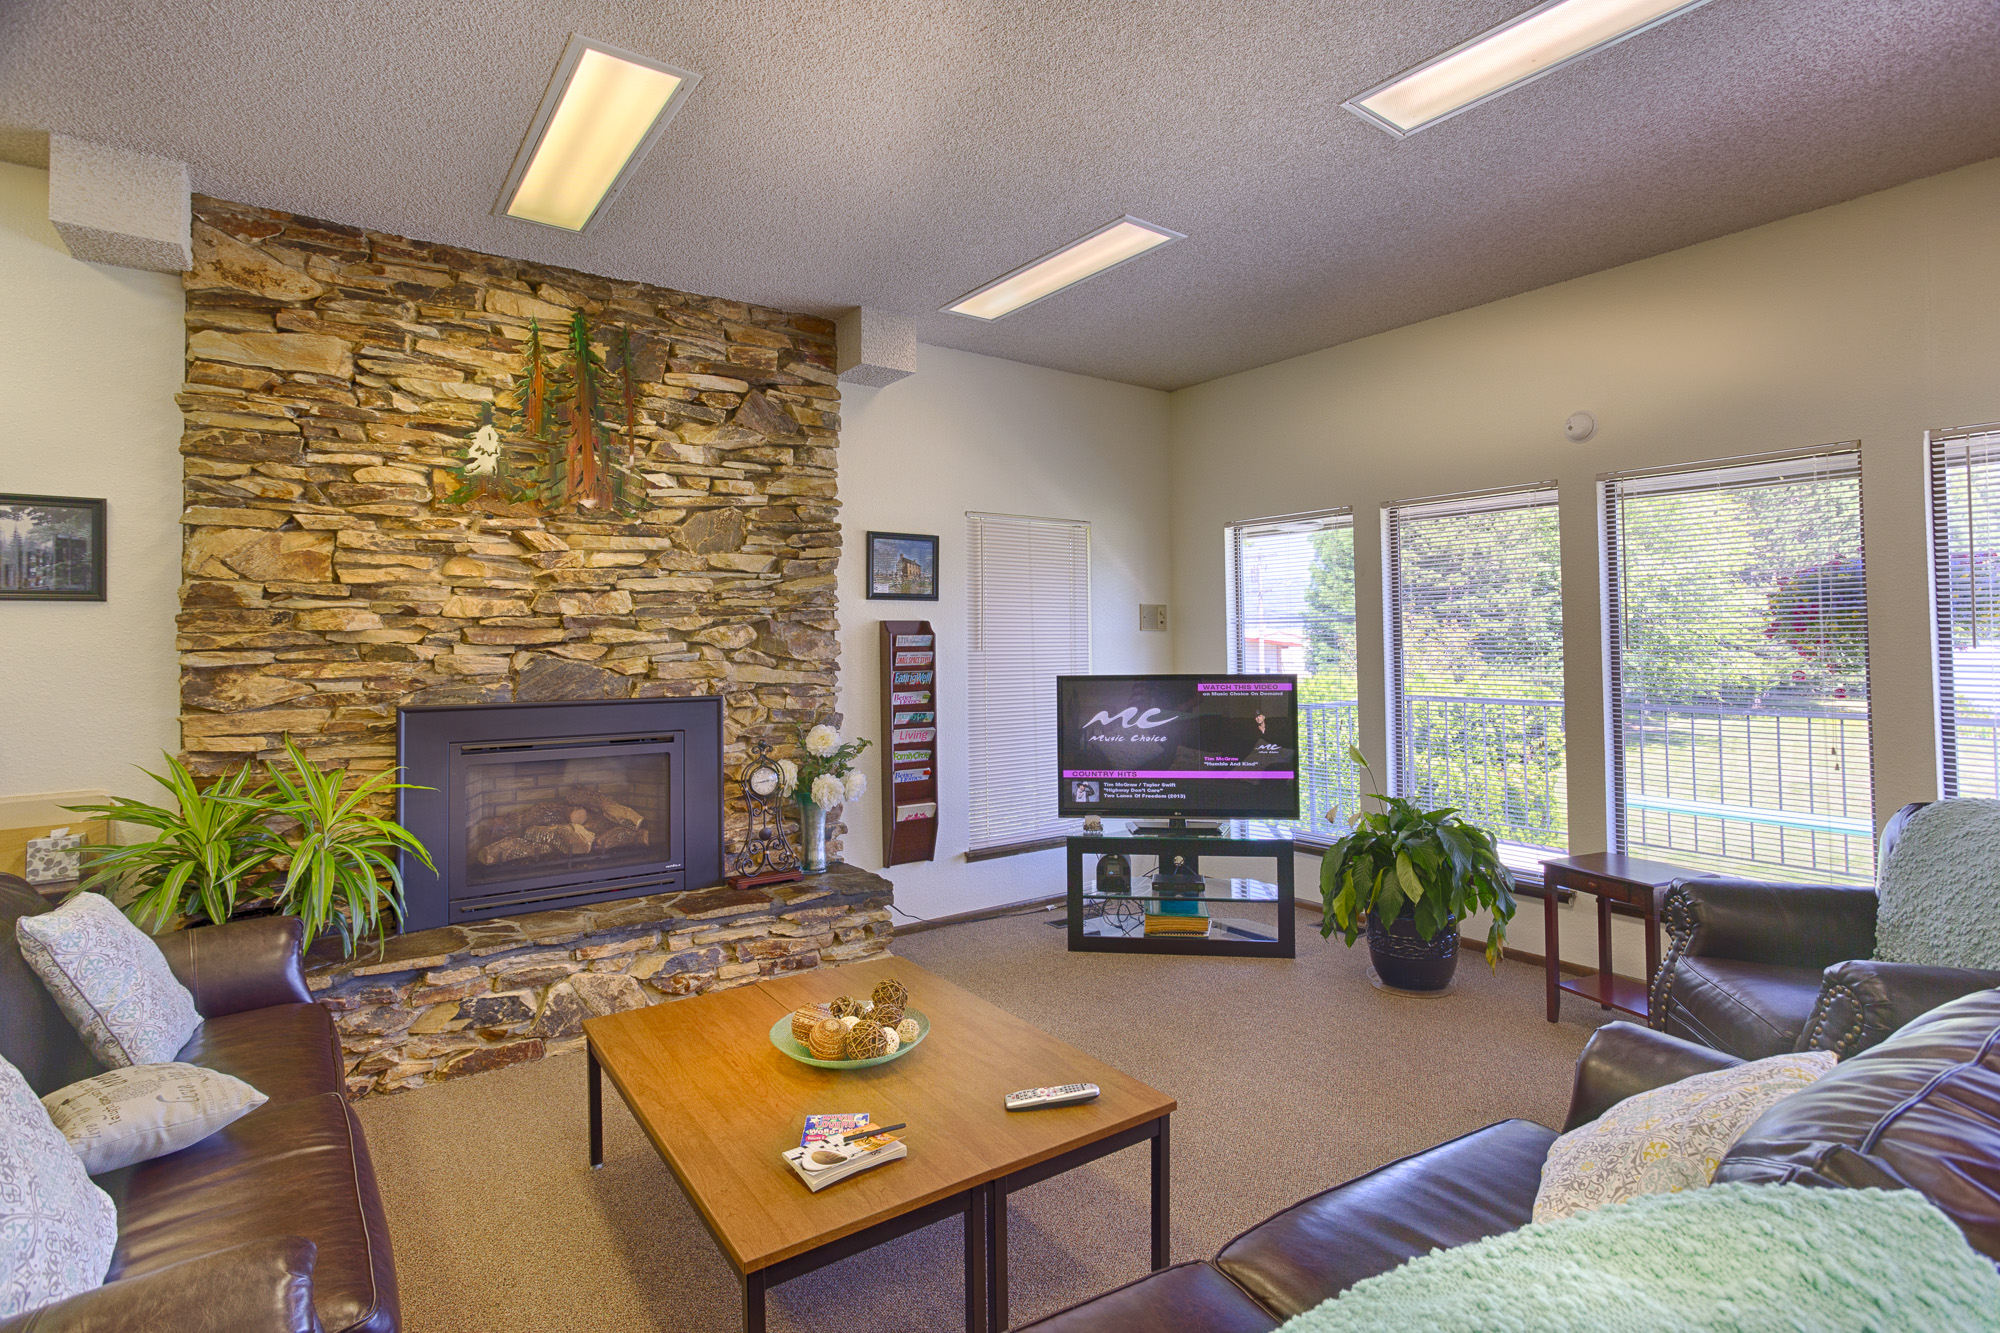 Tranquil community center with stone fireplace and flat screen television. Surrounded by brown leather couches for relaxation.